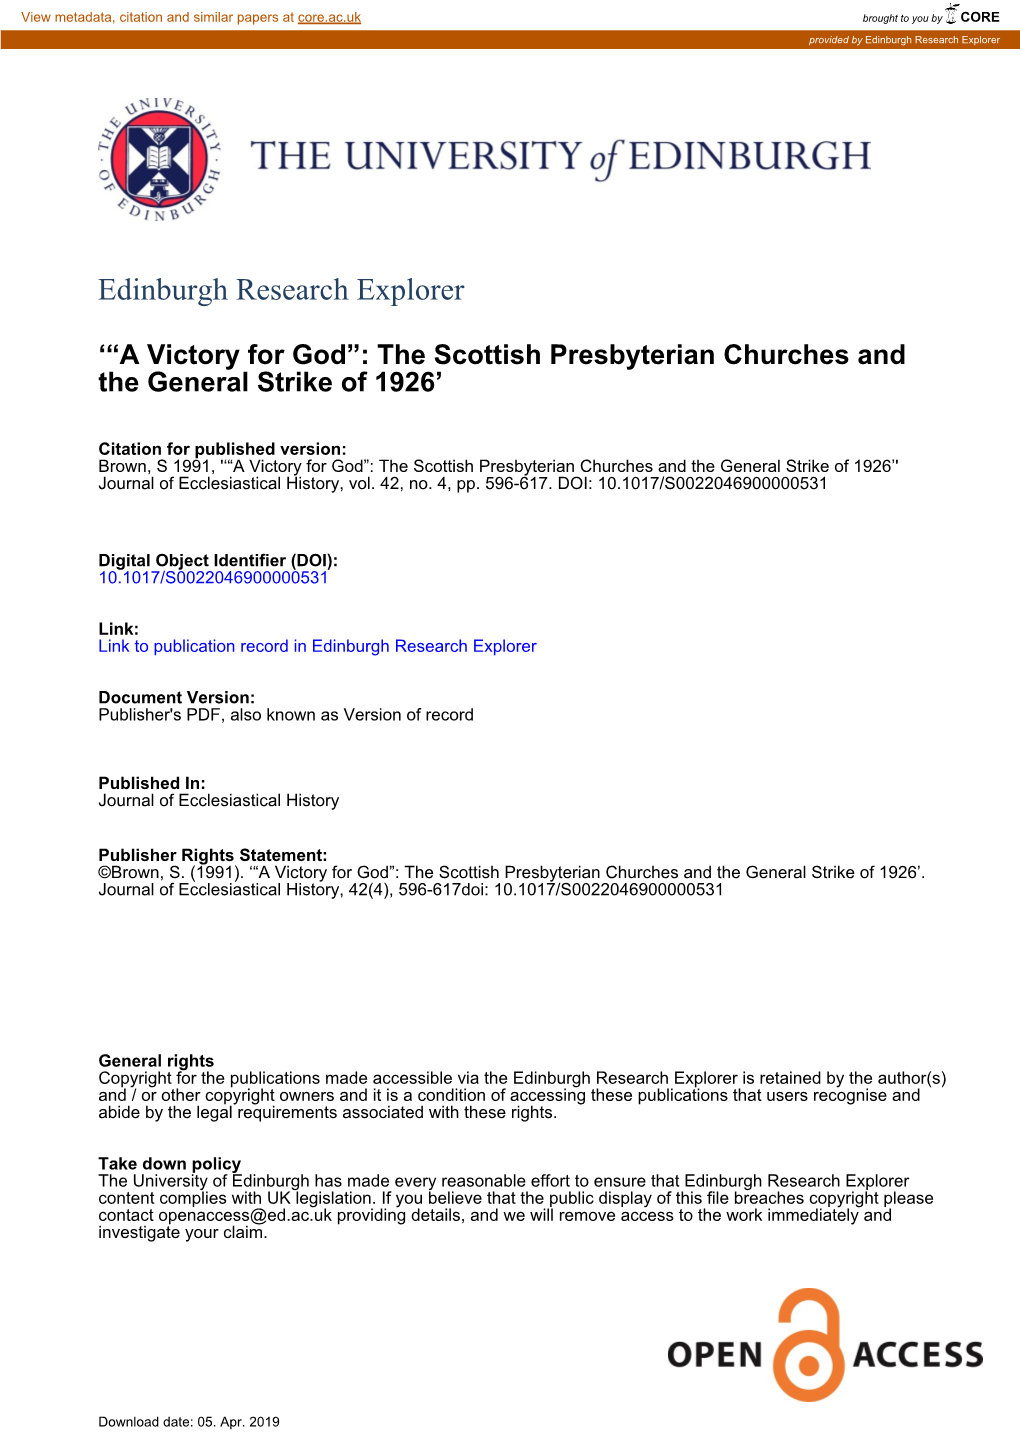 The Scottish Presbyterian Churches and the General Strike of 1926’' Journal of Ecclesiastical History, Vol